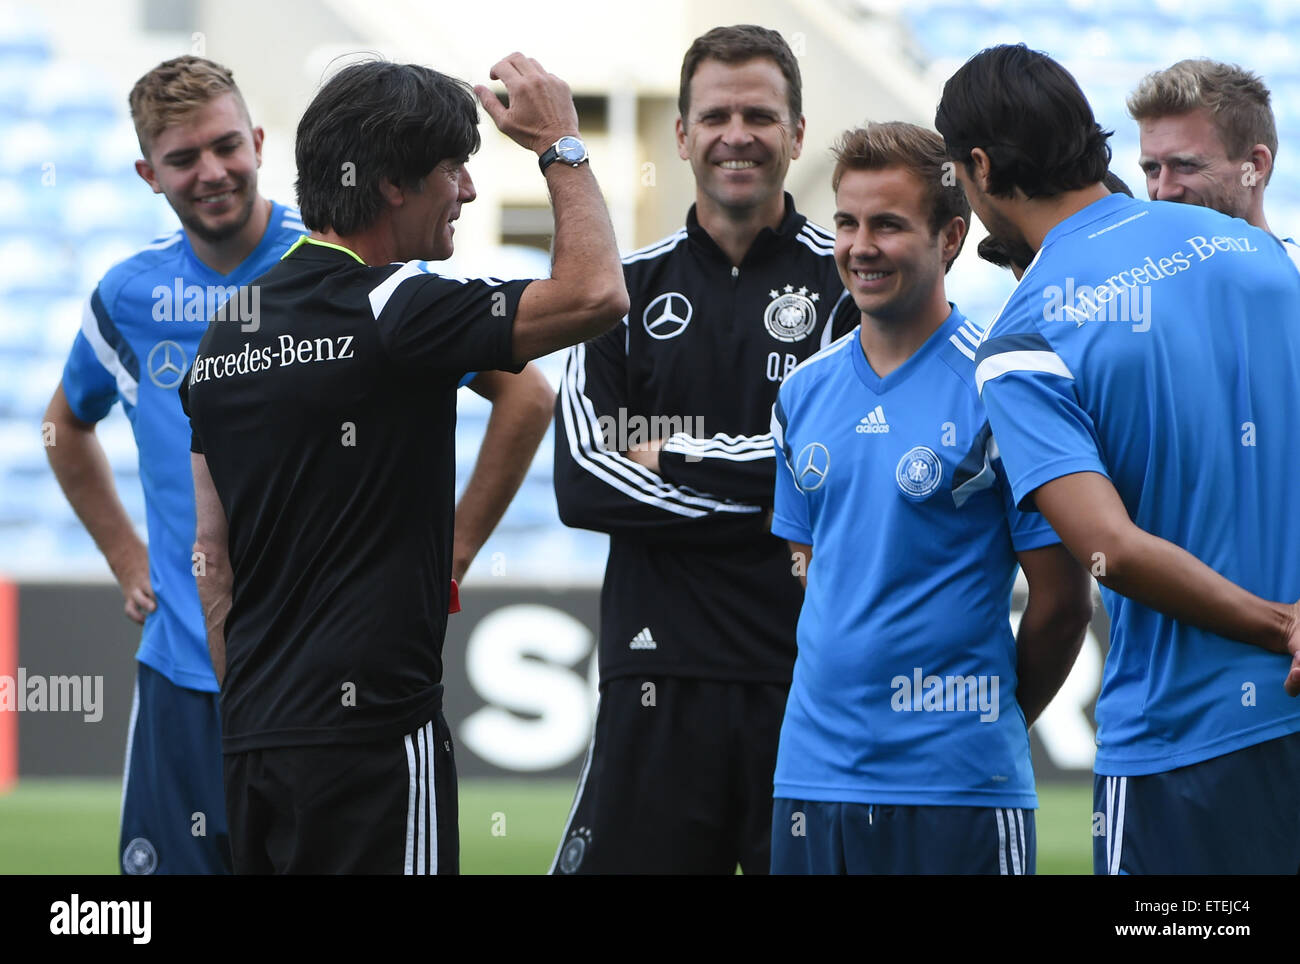 Faro, Portugal. 12th June, 2015. German head coach Joachim Loew (2nd left) talks to Christoph Kramer (l-r), Oliver Bierhoff, Mario Goetze, Sami Khedira and Andre Schuerrle during a training session at the Algarve Stadium of Faro, Portugal, 12 June 2015. Germany will face Gibraltar in the European qualifiers in Faro on 13 June 2015. Photo: Arne Dedert/dpa/Alamy Live News Stock Photo